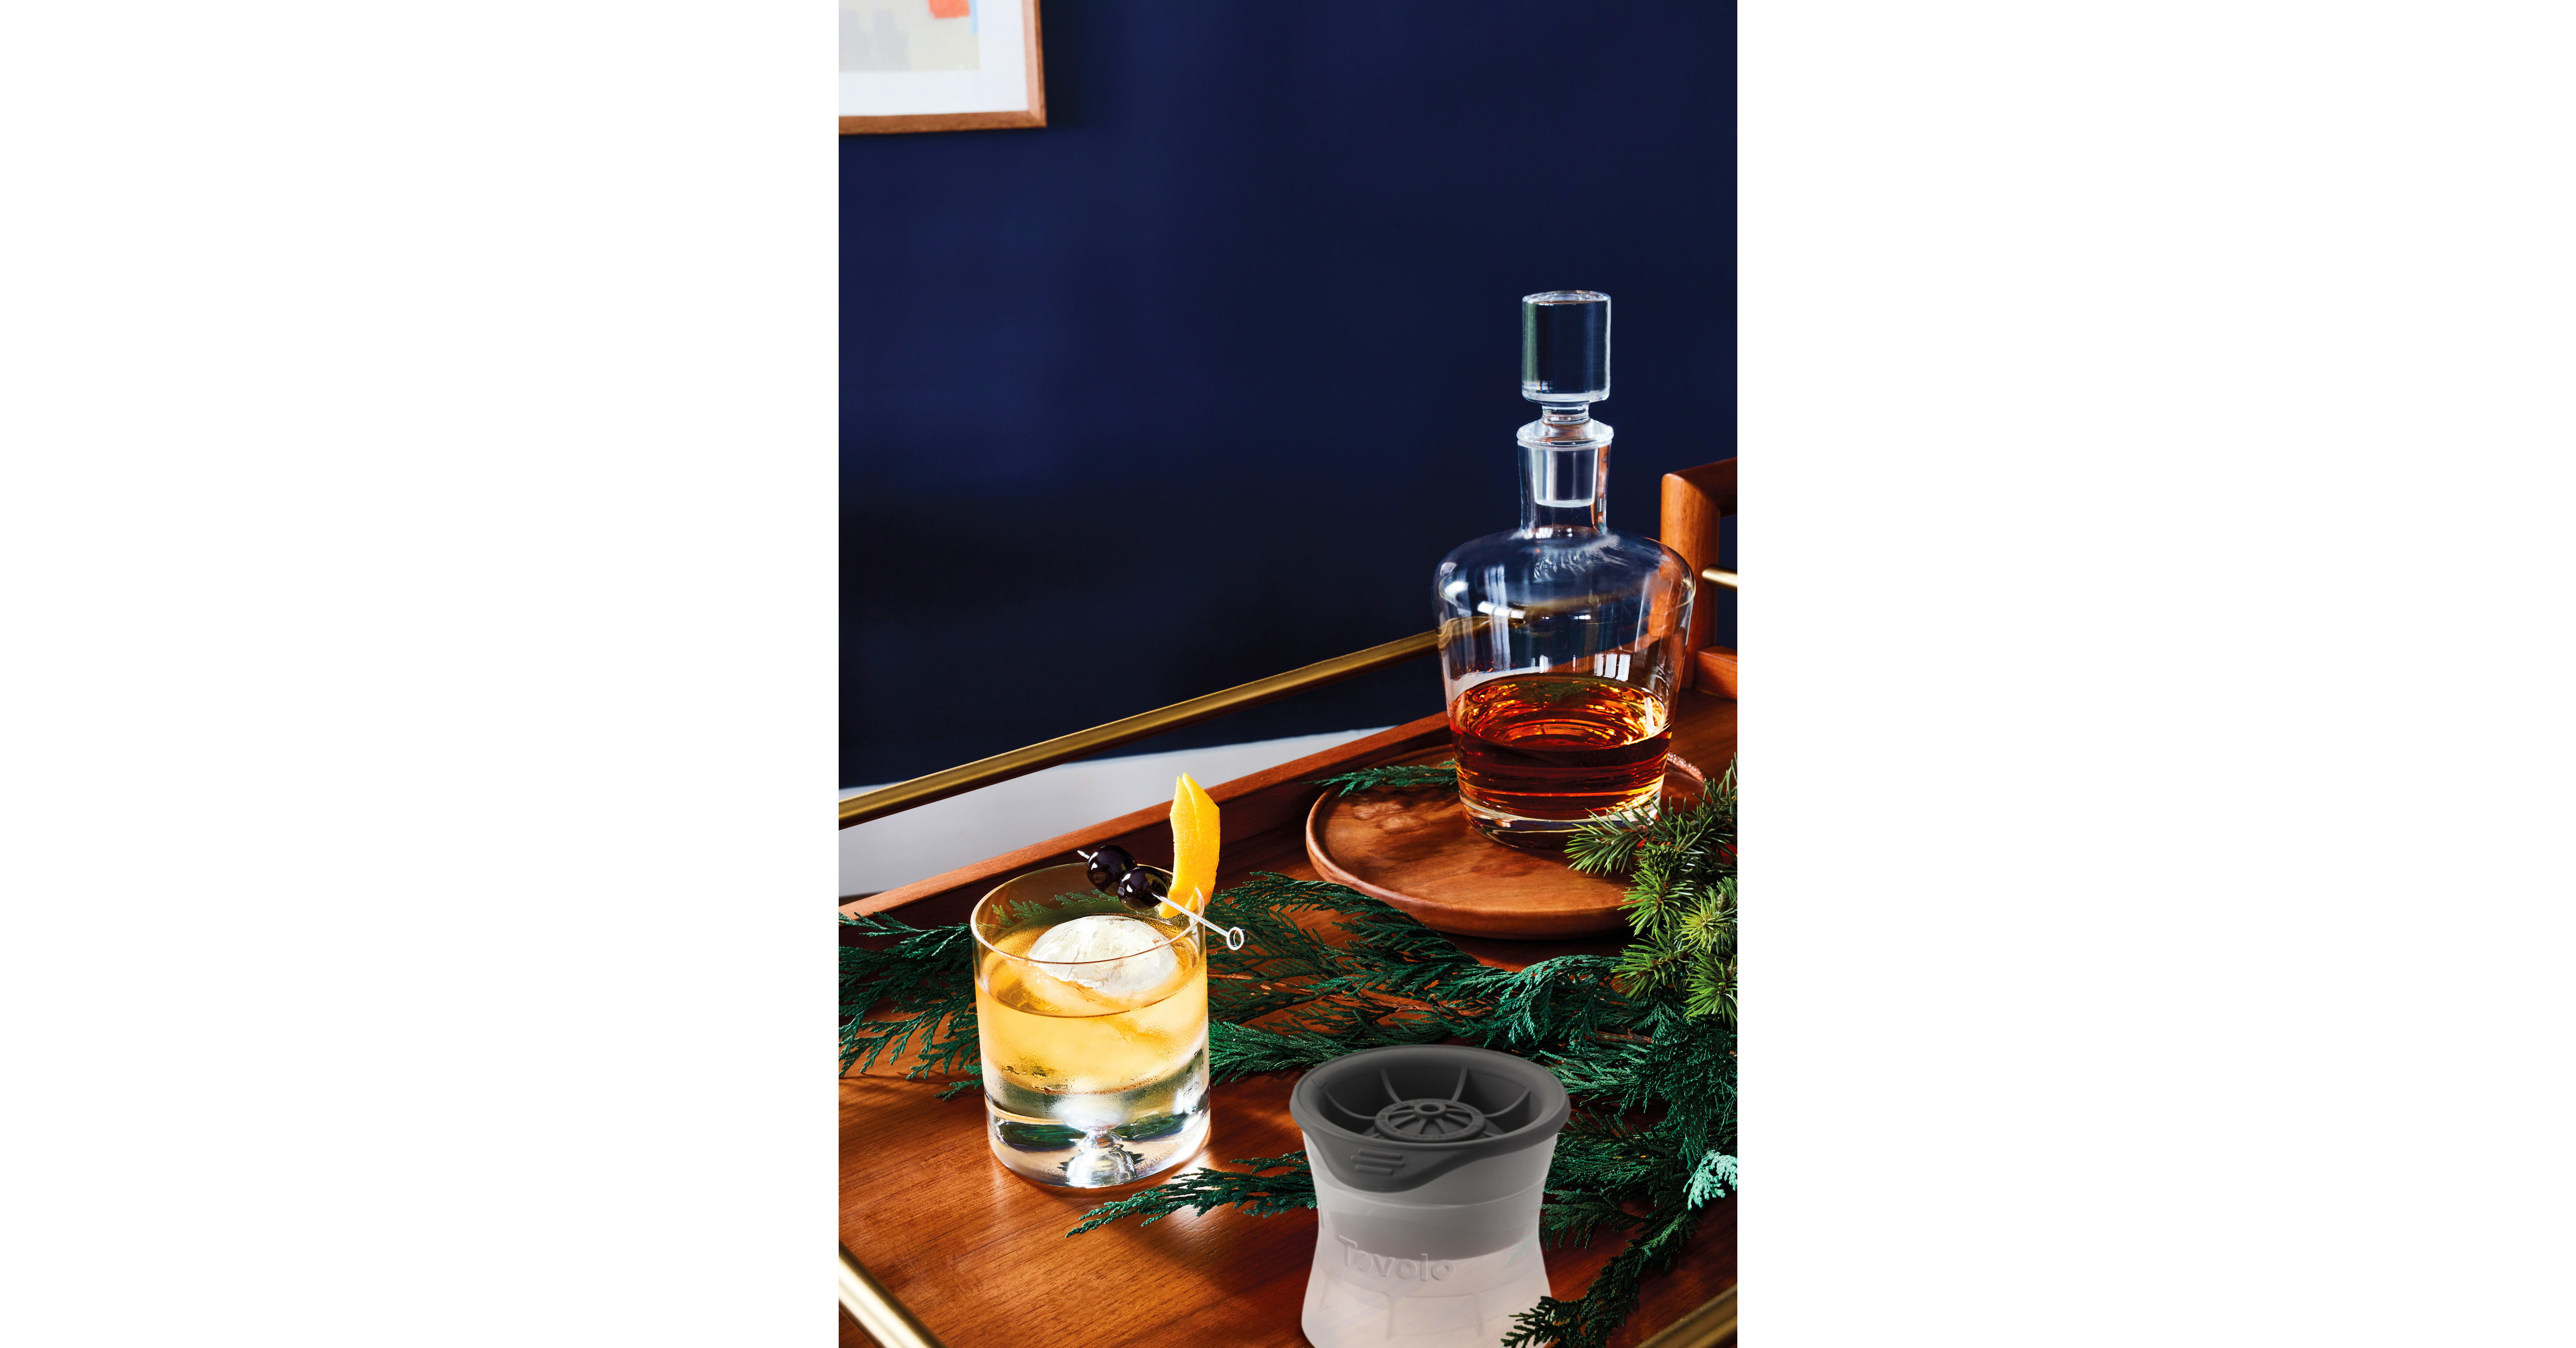 New Craft Ice Mold Designs from Tovolo Add Festive Flare to Fall Beverages